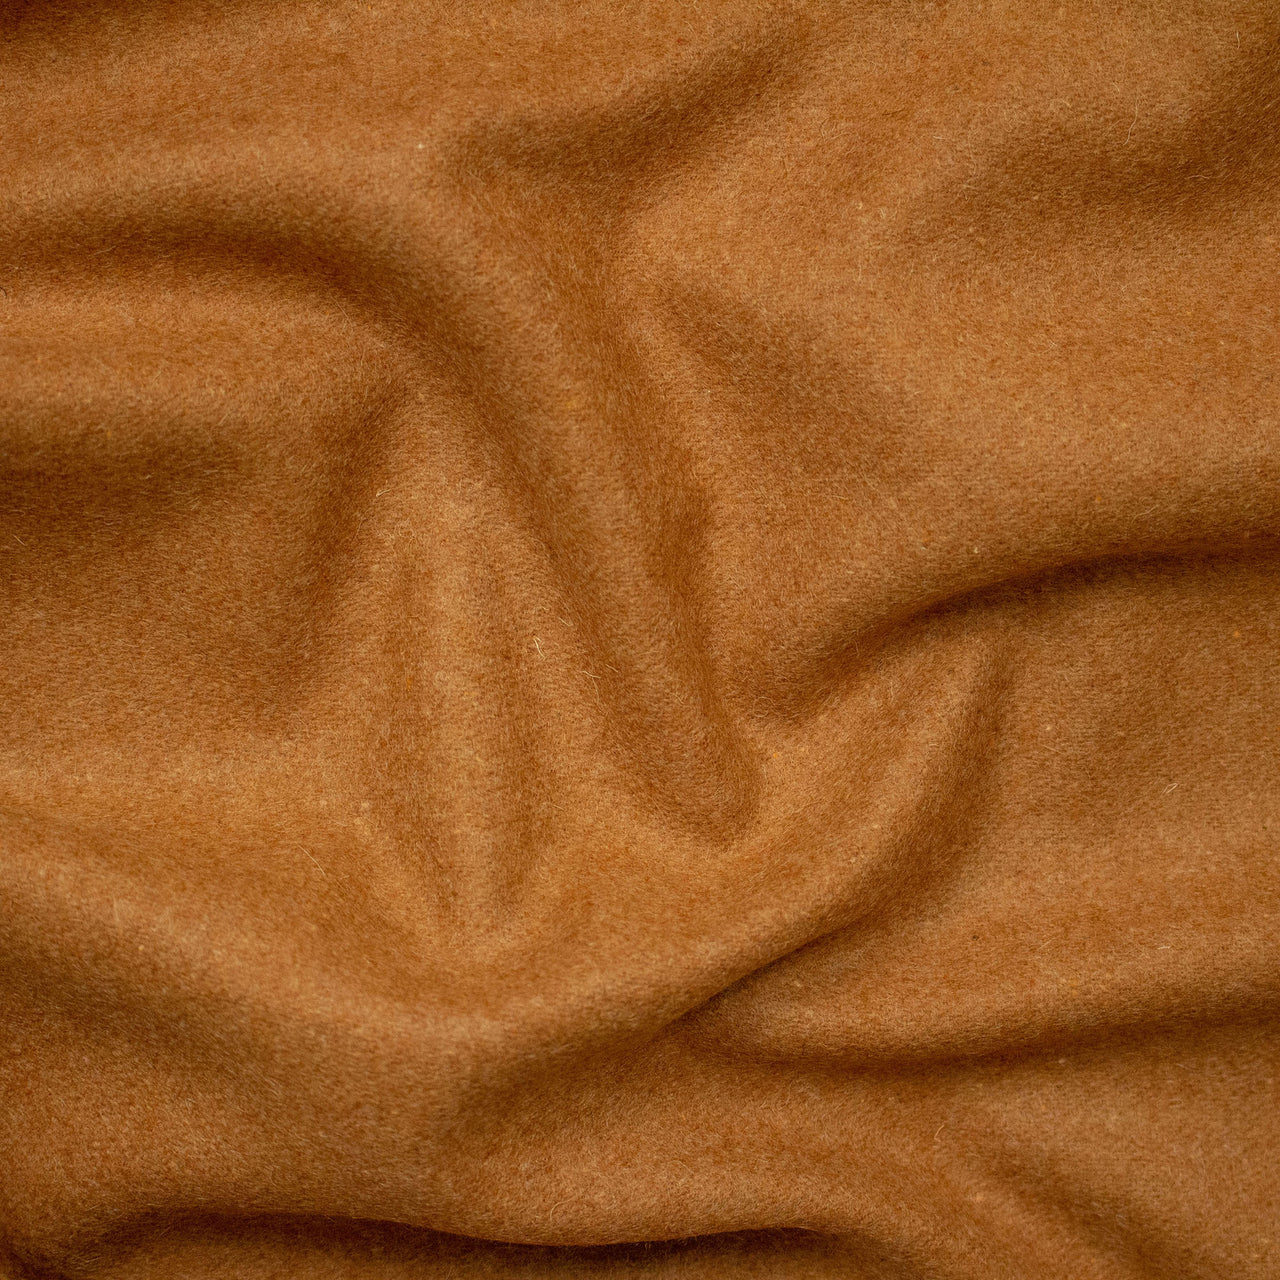 Camel - Melton Wool Fabric -  Soft and Warm Fabric for Coats, Clothing and Blankets